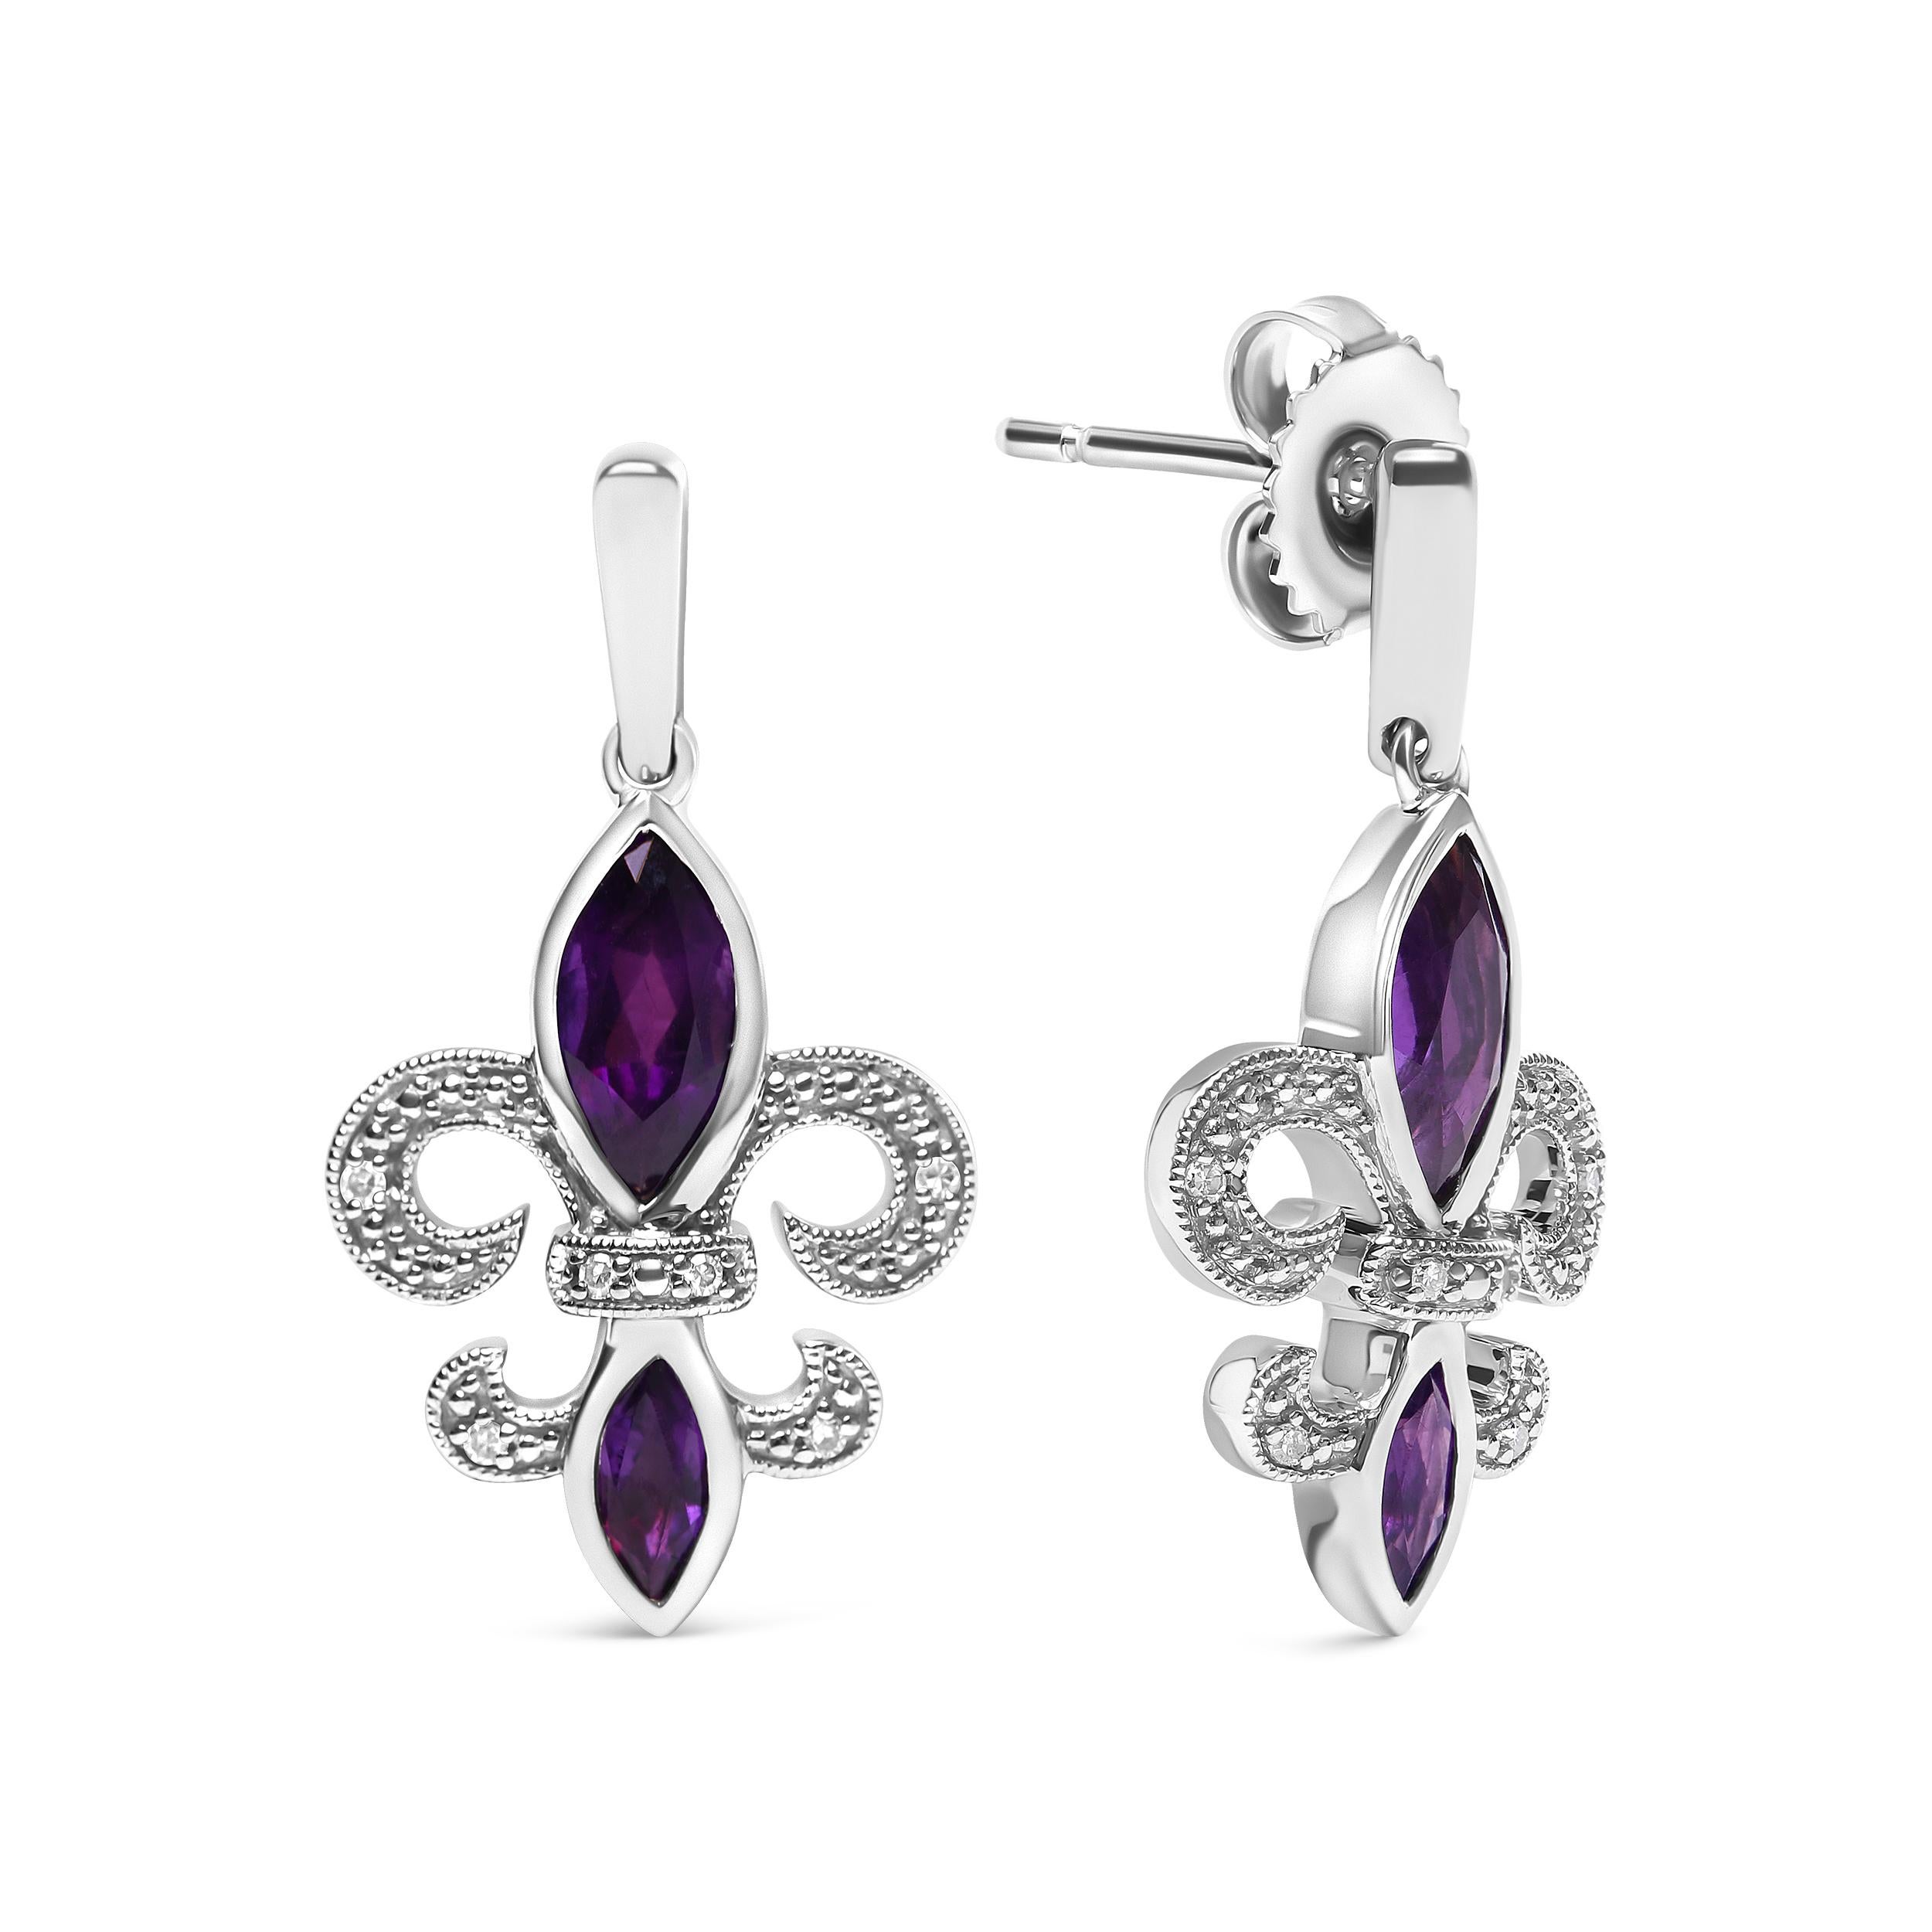 Indulge in the luxurious beauty of these .925 sterling silver amethyst and diamond fleur de lis dangle stud earrings. The unique design, featuring four natural heat-treated purple amethysts, is guaranteed to turn heads and make a statement. The